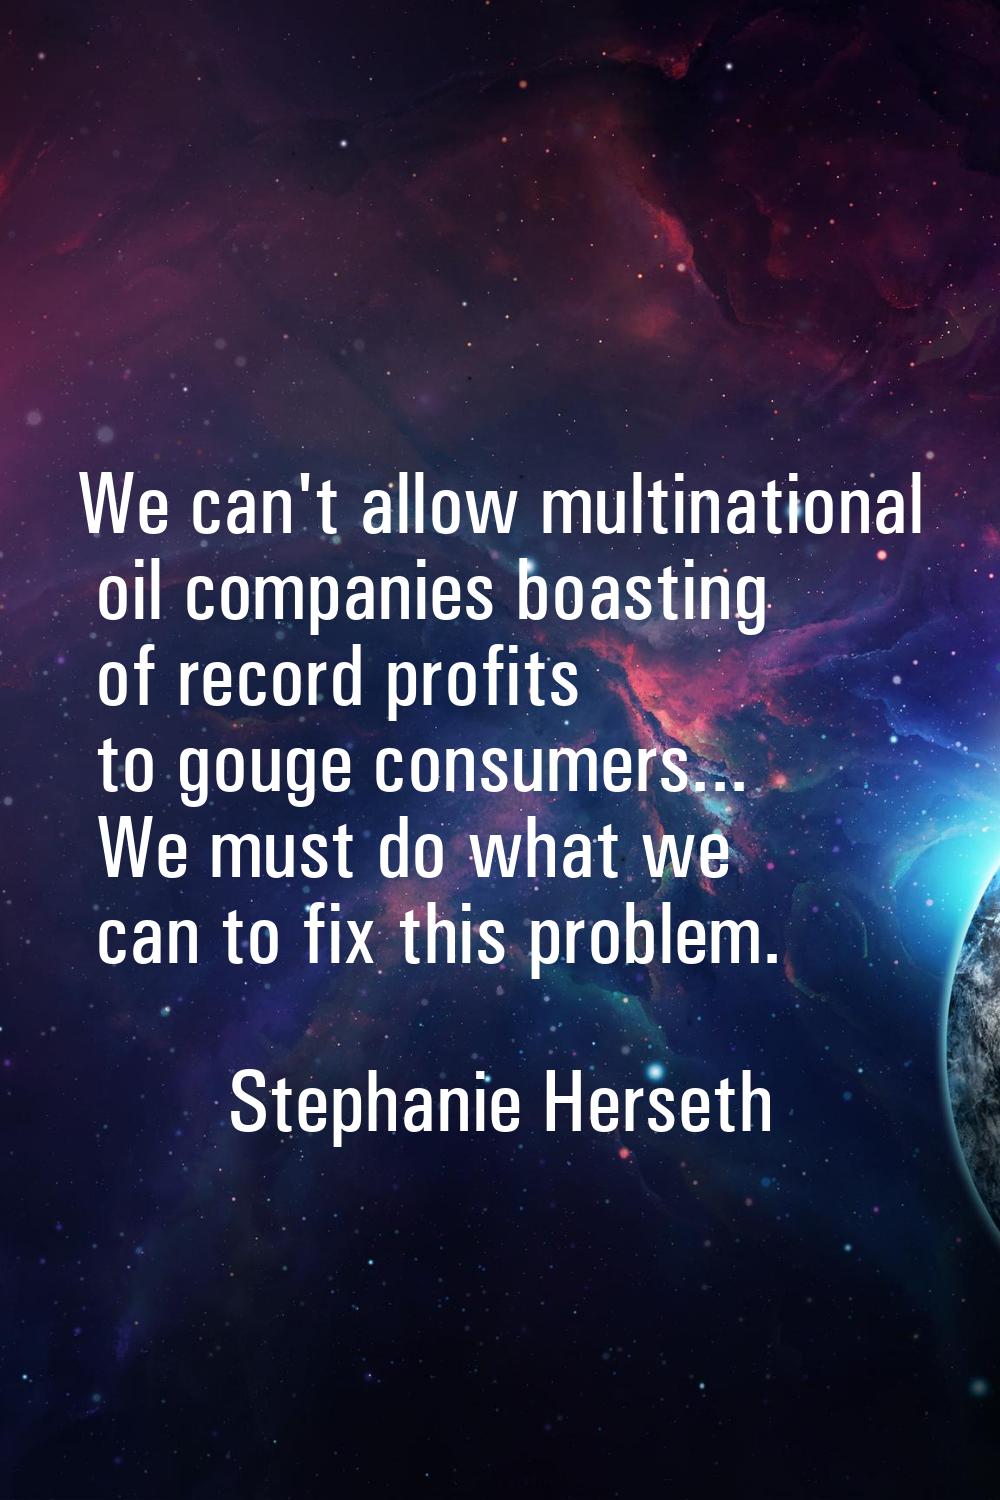 We can't allow multinational oil companies boasting of record profits to gouge consumers... We must